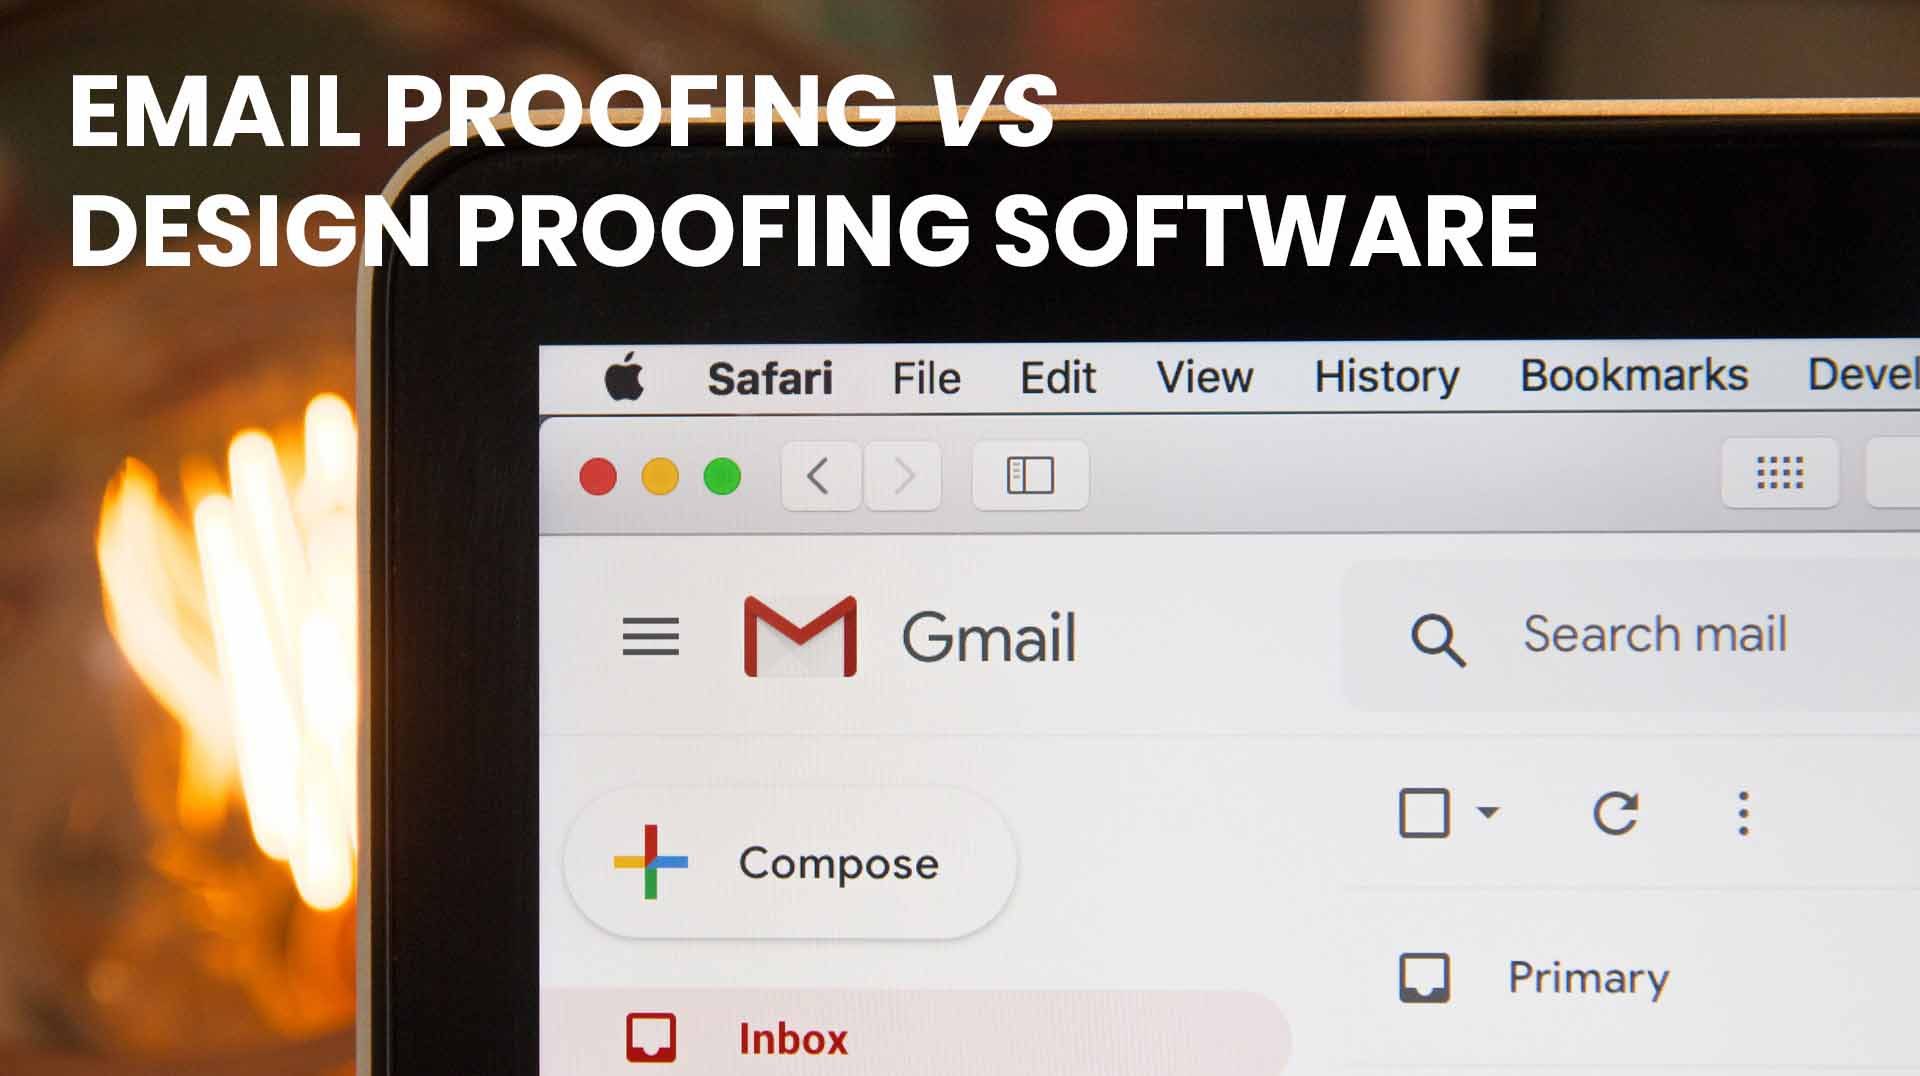 email-proofing-vs-design-proofing-software-opt